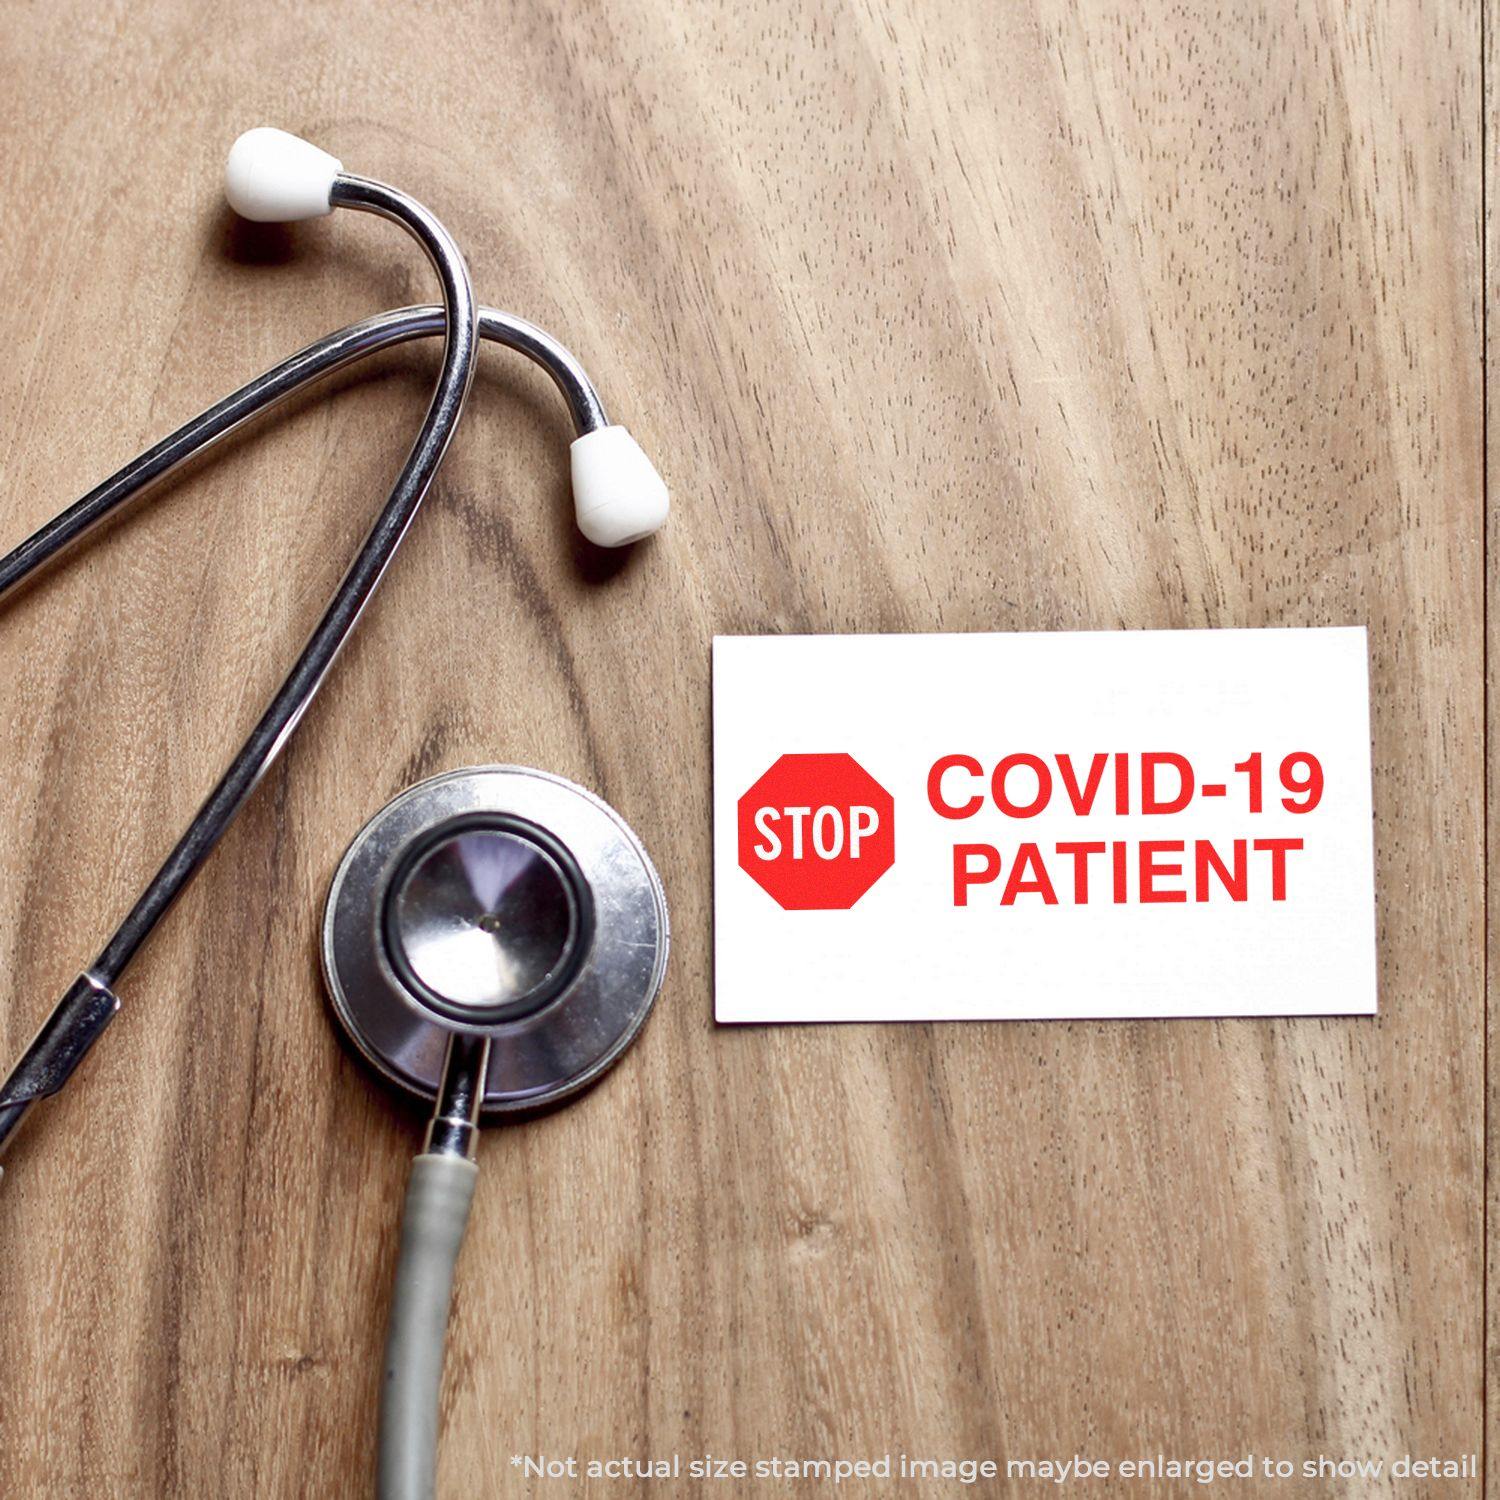 A stock office rubber stamp with a stamped image showing how the text "COVID-19 PATIENT" in a large font with a "STOP" sign board on the left side is displayed after stamping.